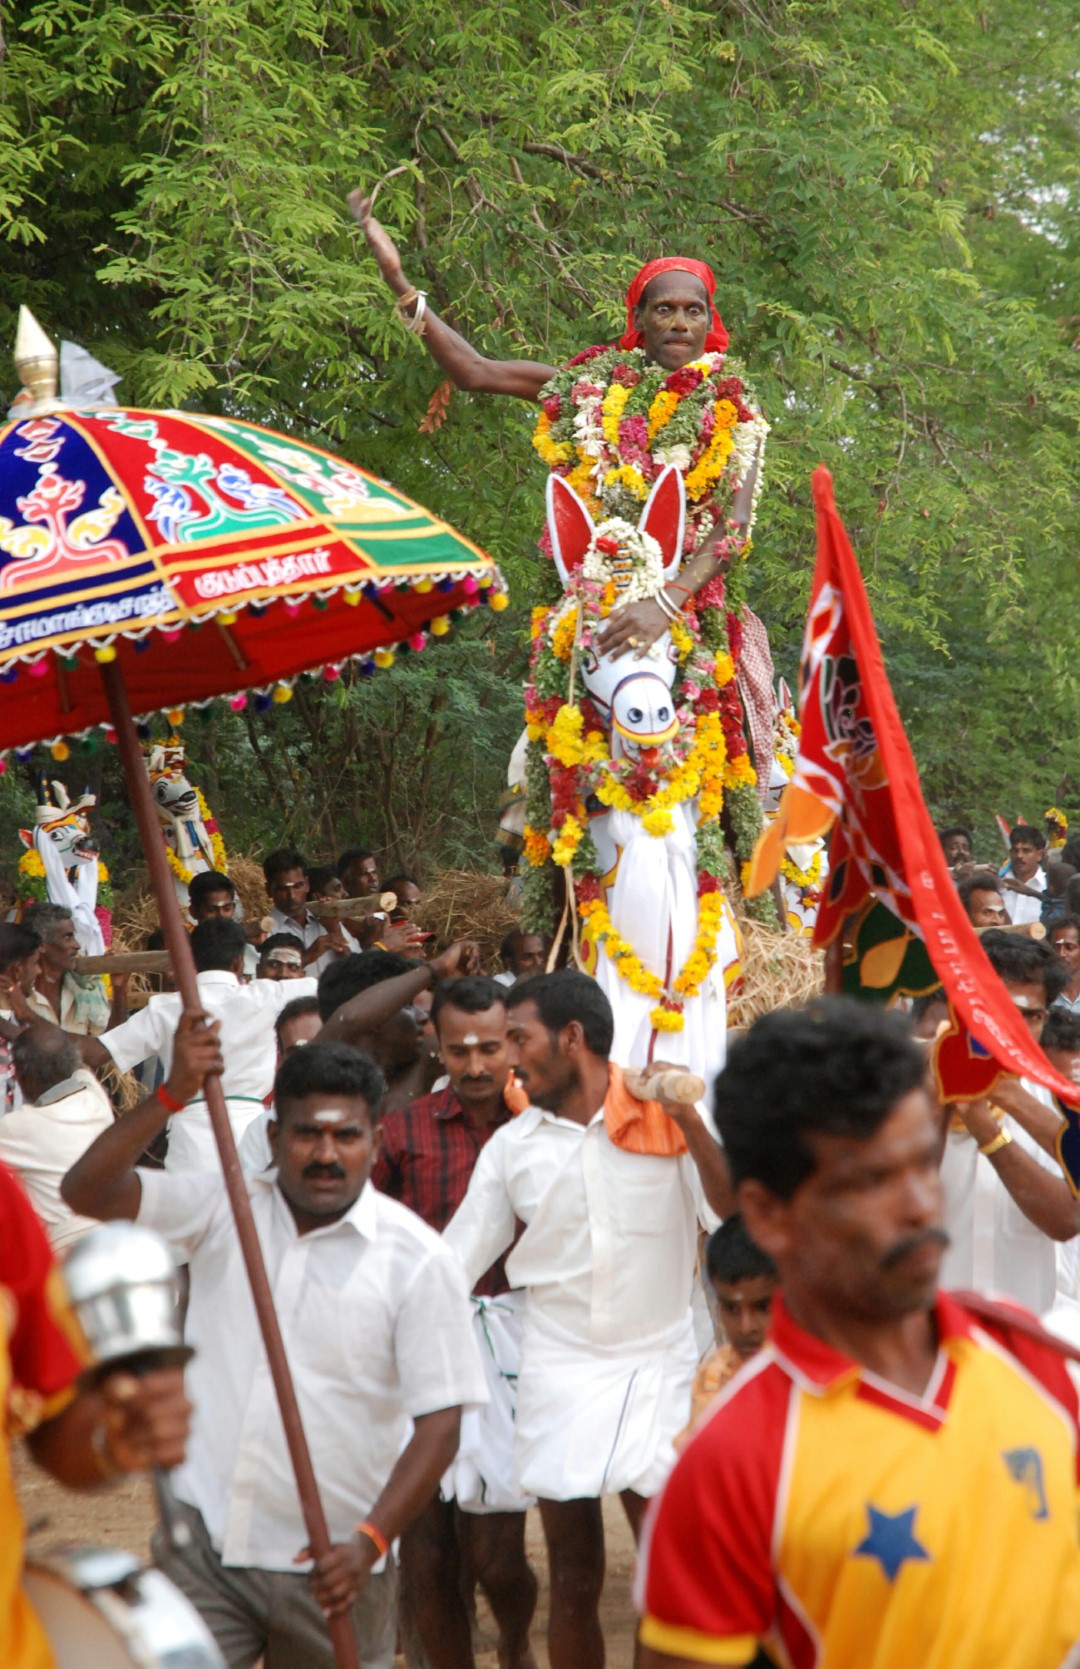 <span style="font-weight:normal;">At this festival, all of the numerous rituals are completed in one afternoon in the potters' village. After the "eye opening" ceremony, Ayyanar rides on his horse from the potters' village to the shrine. Once there, Ayyanar will continue to bless his subjects and the offerings will find their permanent home next to the previous years' pieces.</span>